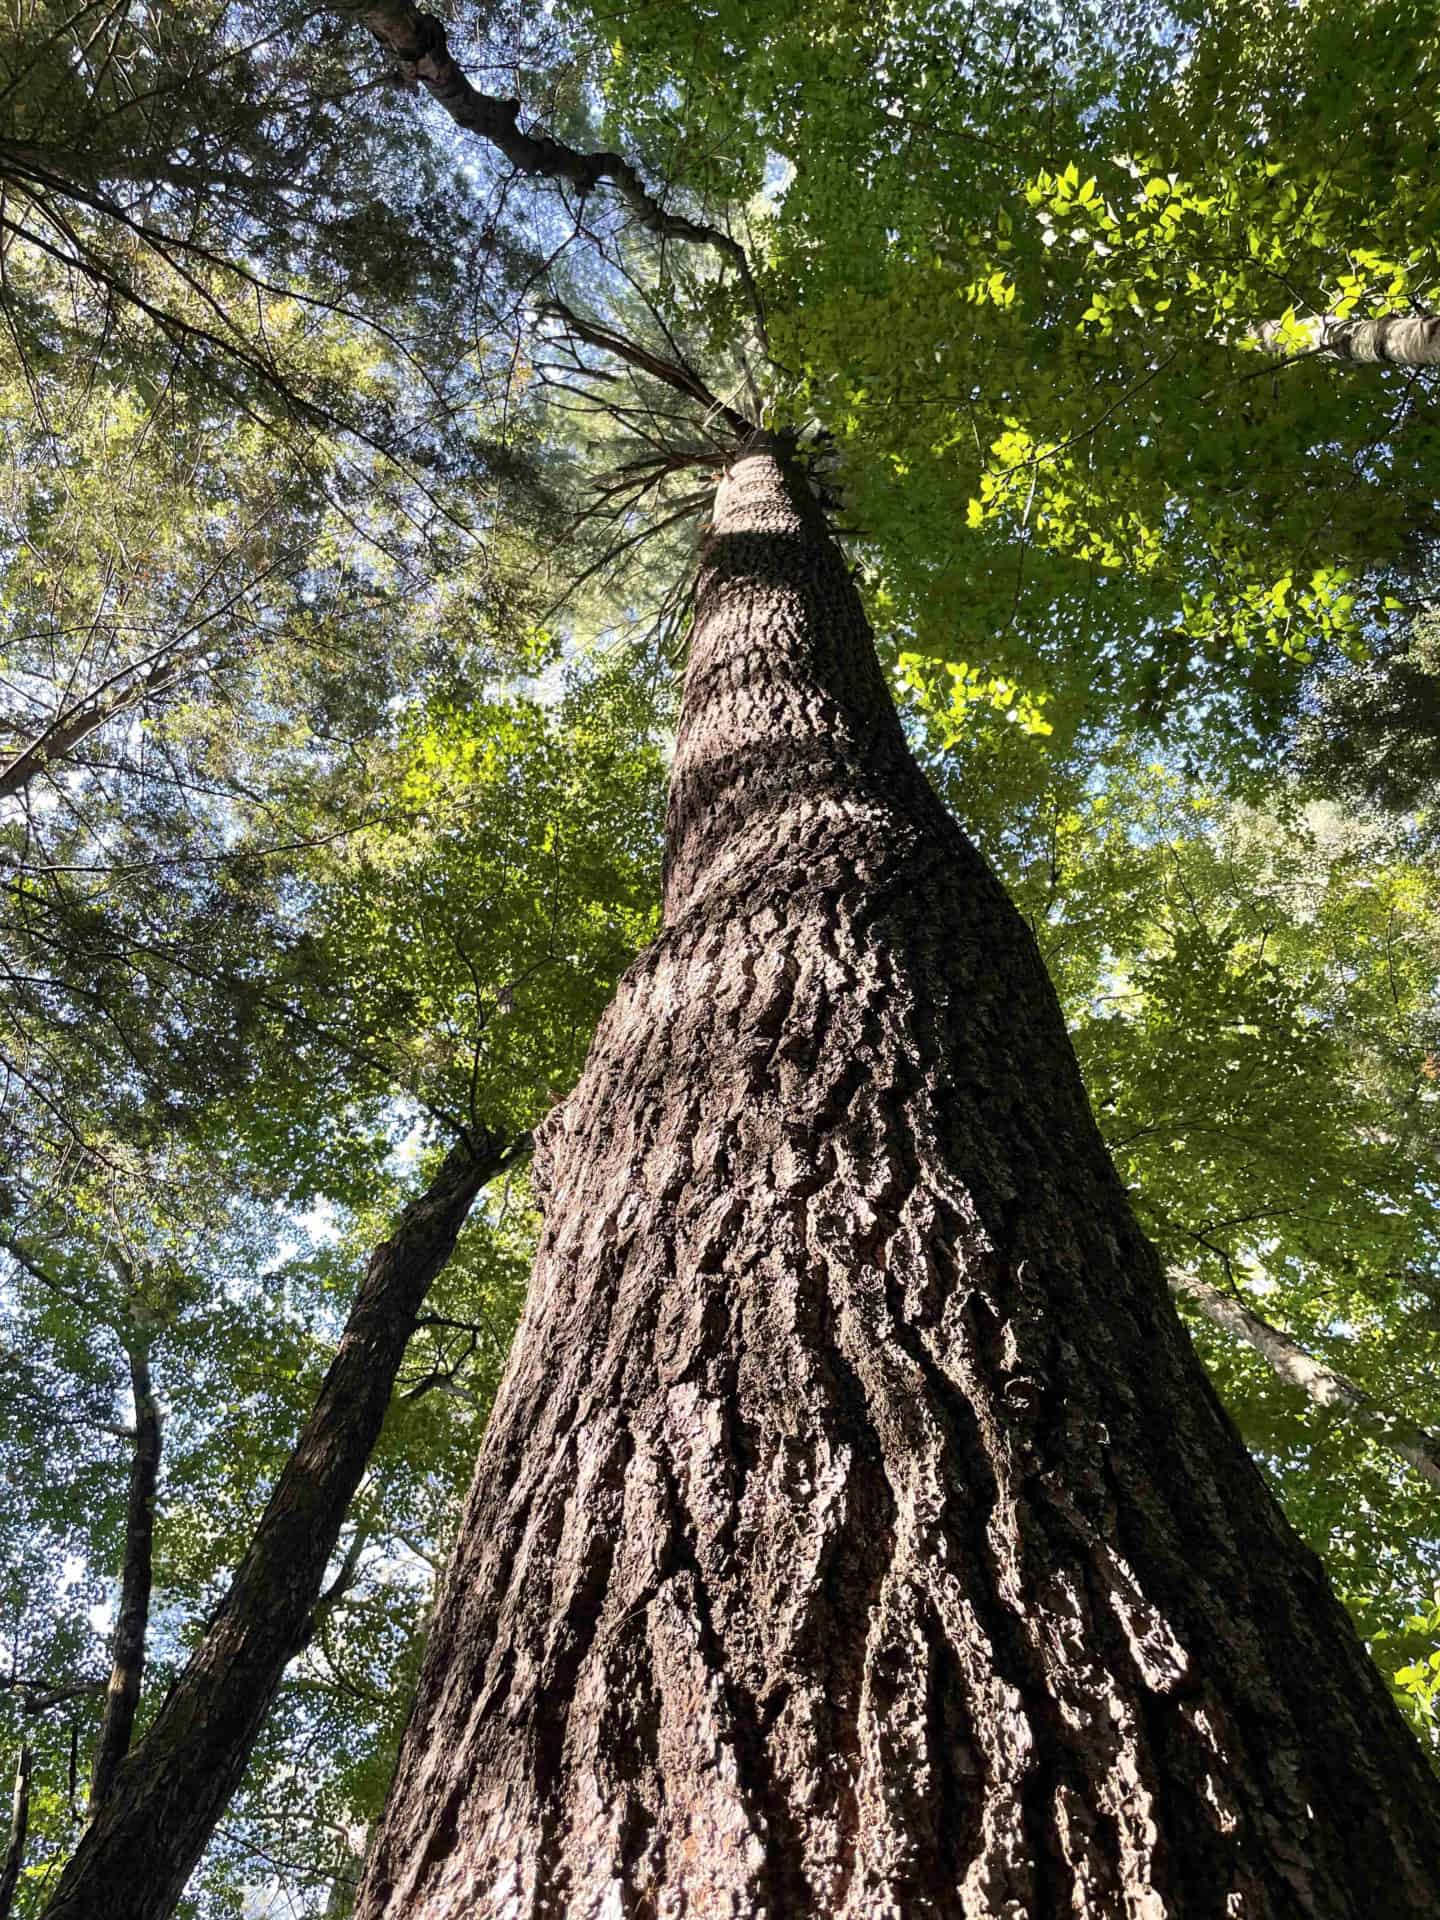 Old growth pine trees along the Deerfield River can stand 150 feet tall.